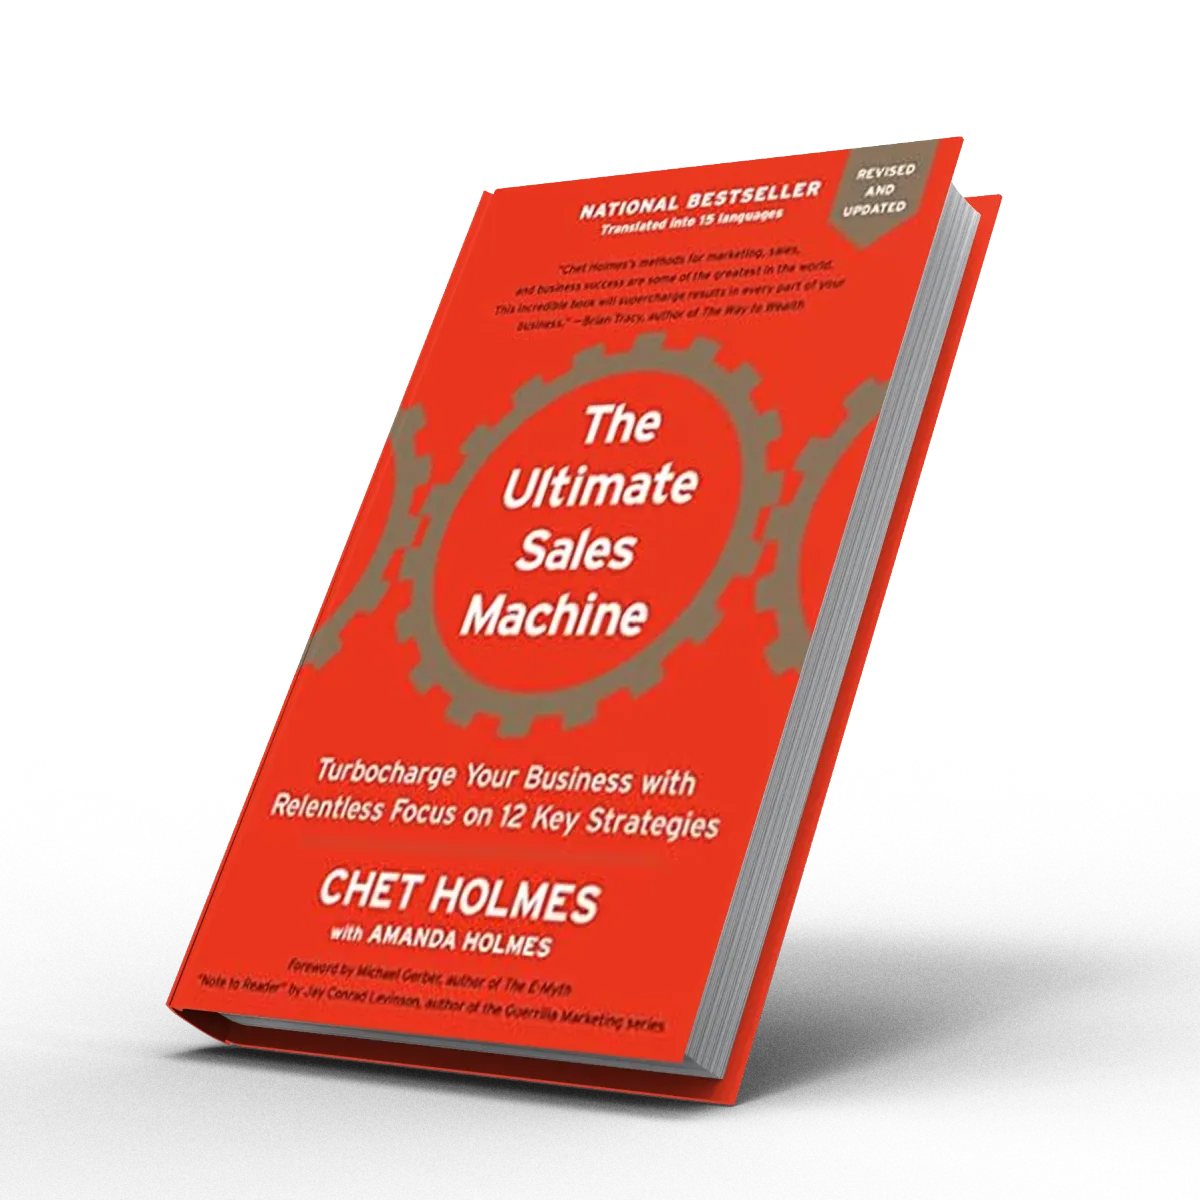 The Ultimate Sales Machine